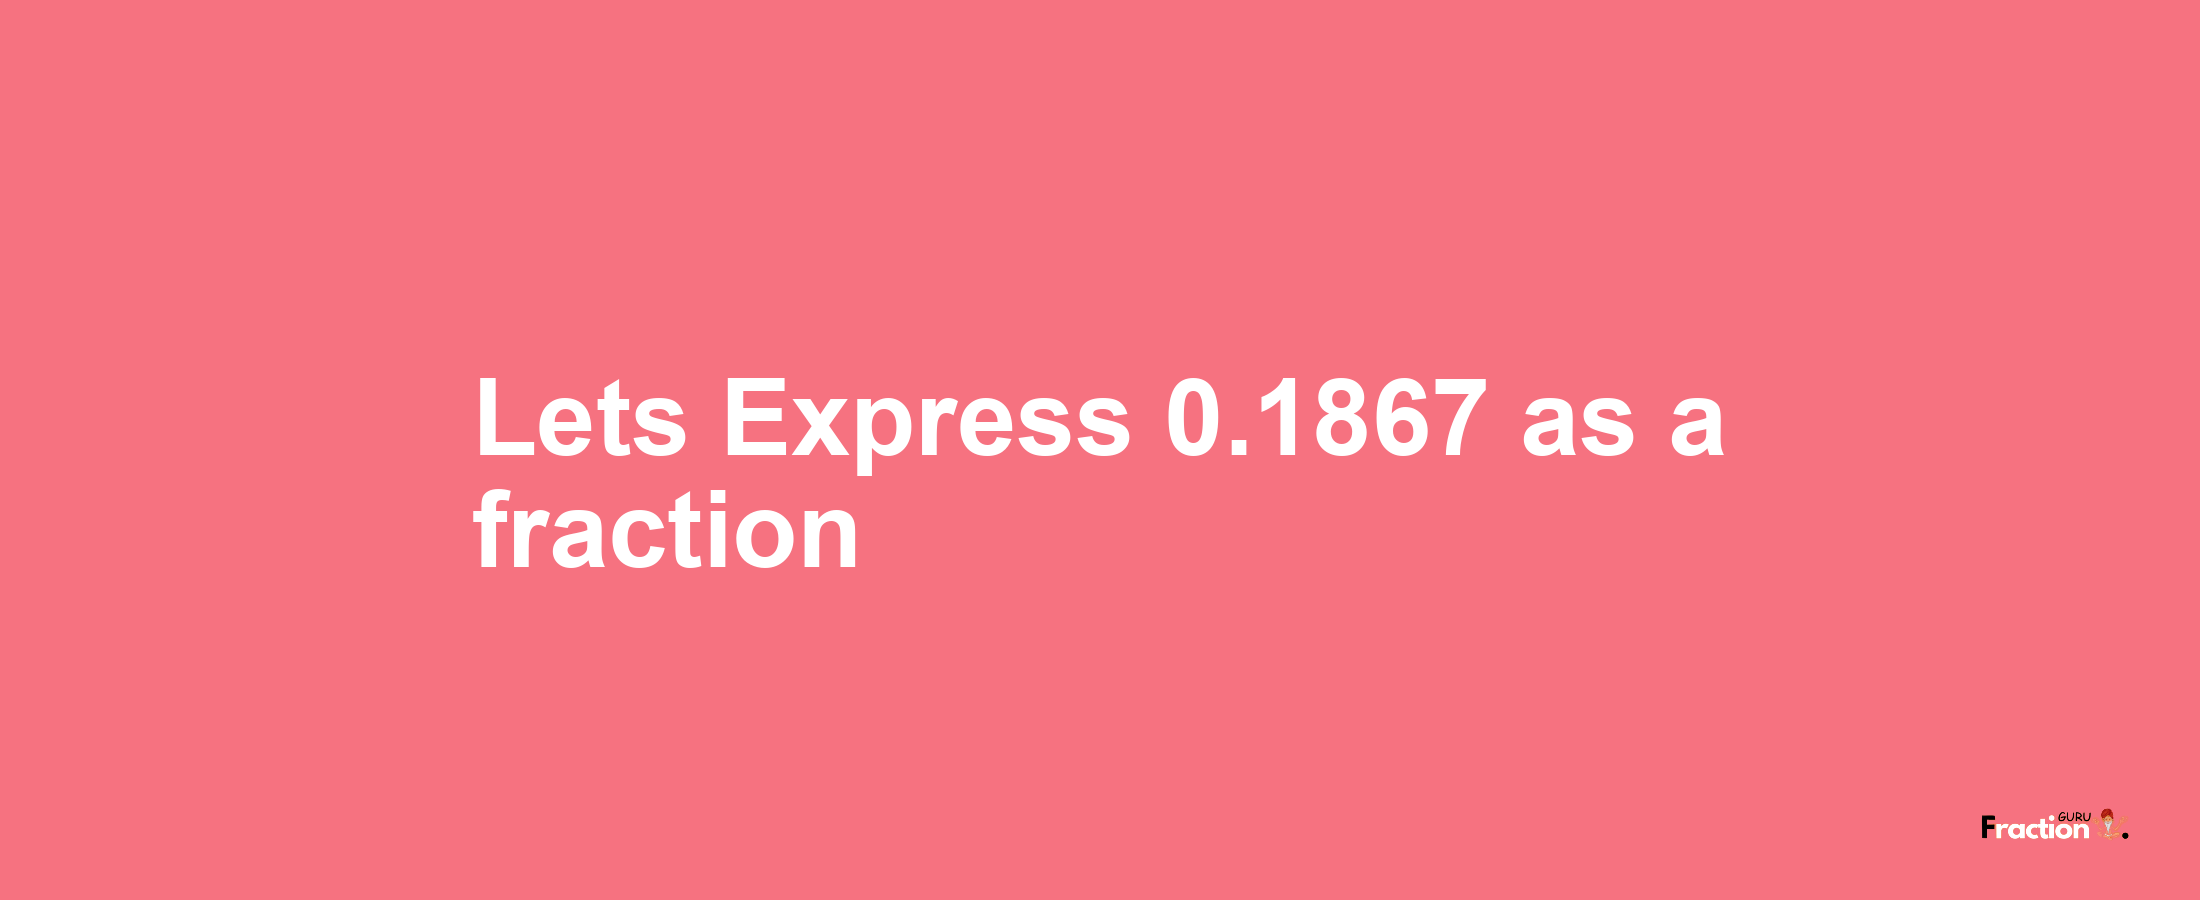 Lets Express 0.1867 as afraction